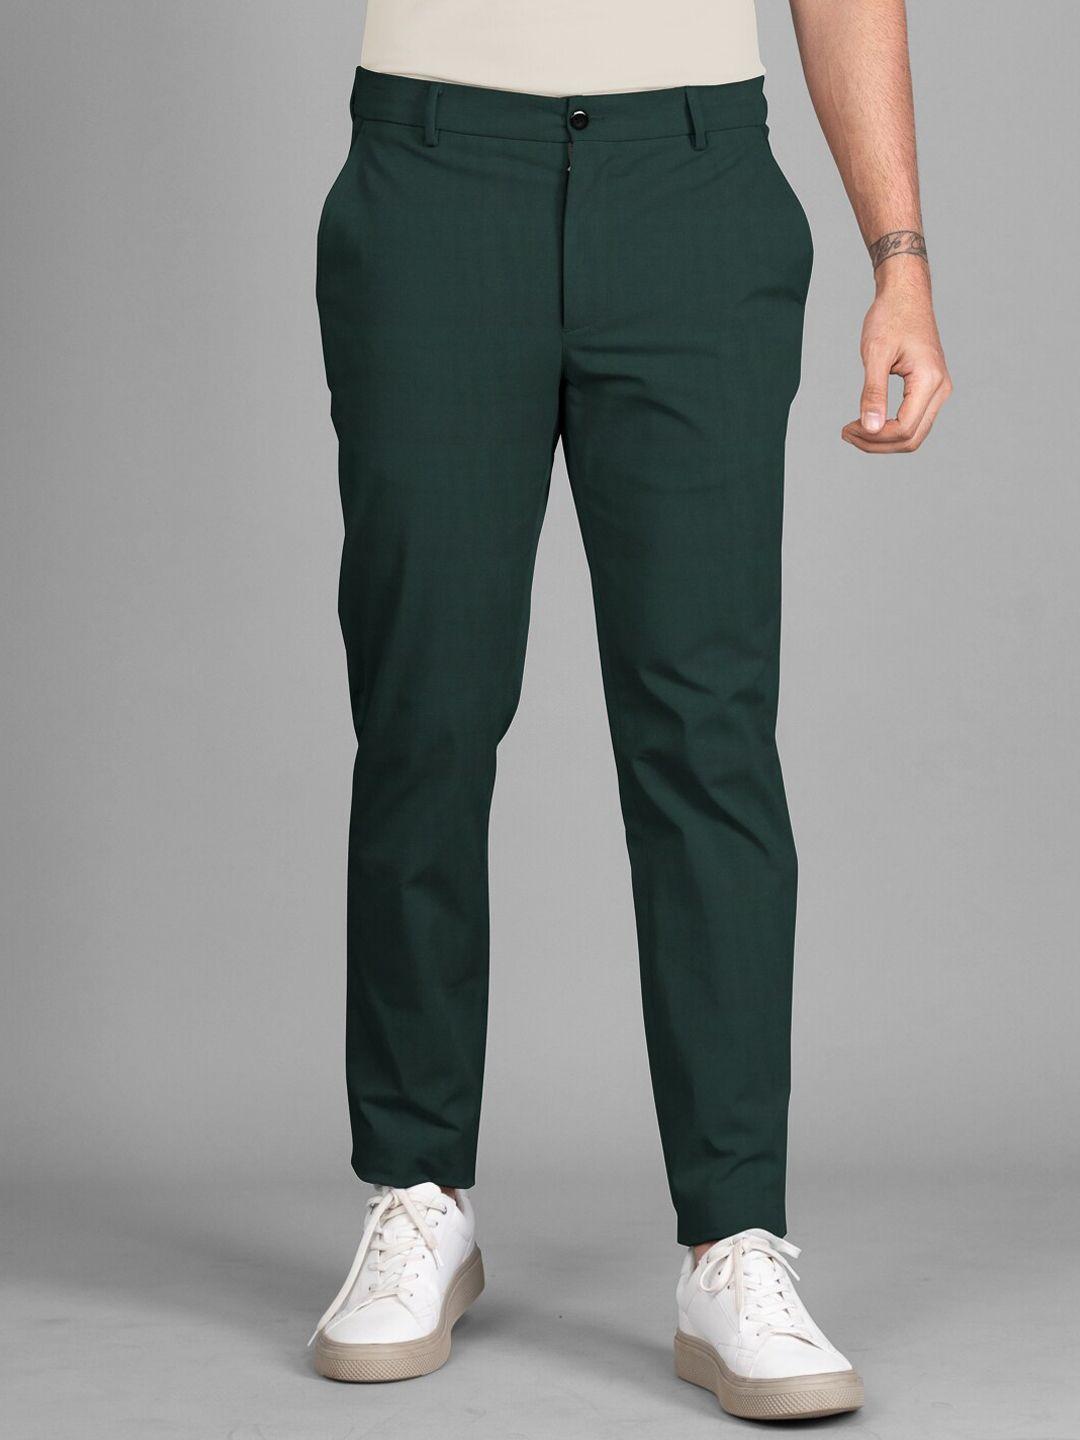 the pant project men tailored slim fit cotton chinos trousers